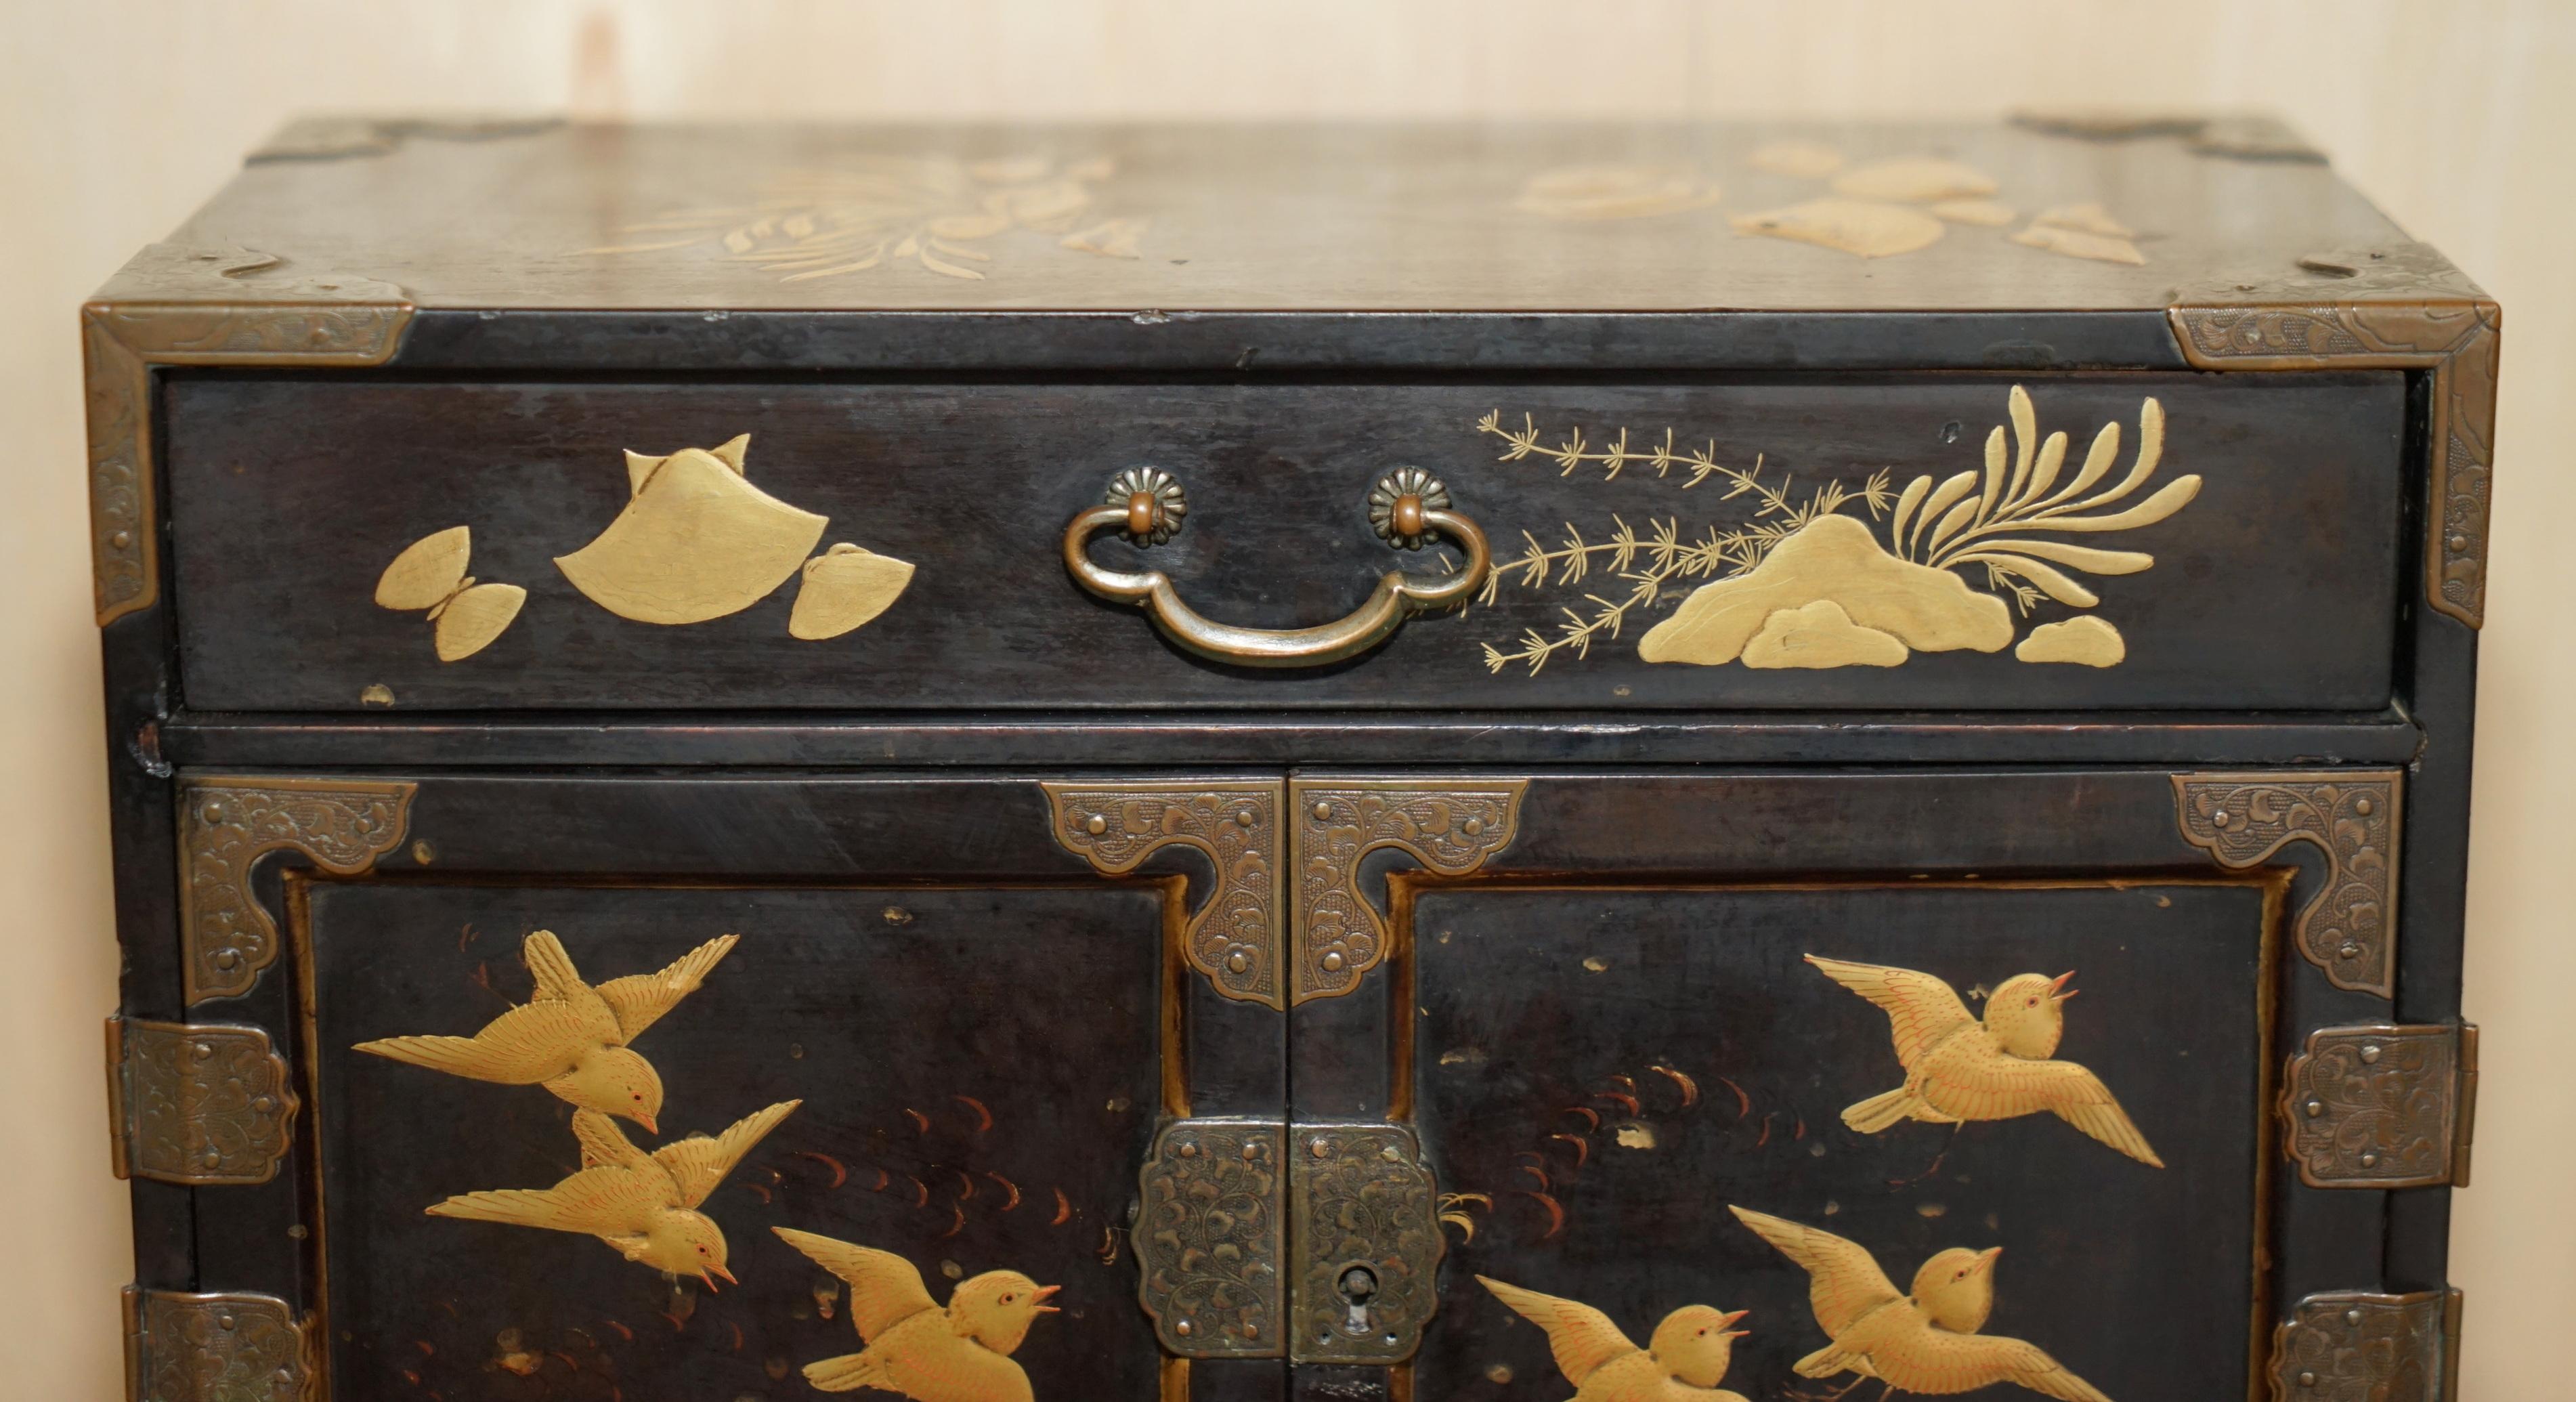 Chinese Export Fine Antique Collectable Chinese Table Top Cabinet Jewellery Collectors Storage For Sale